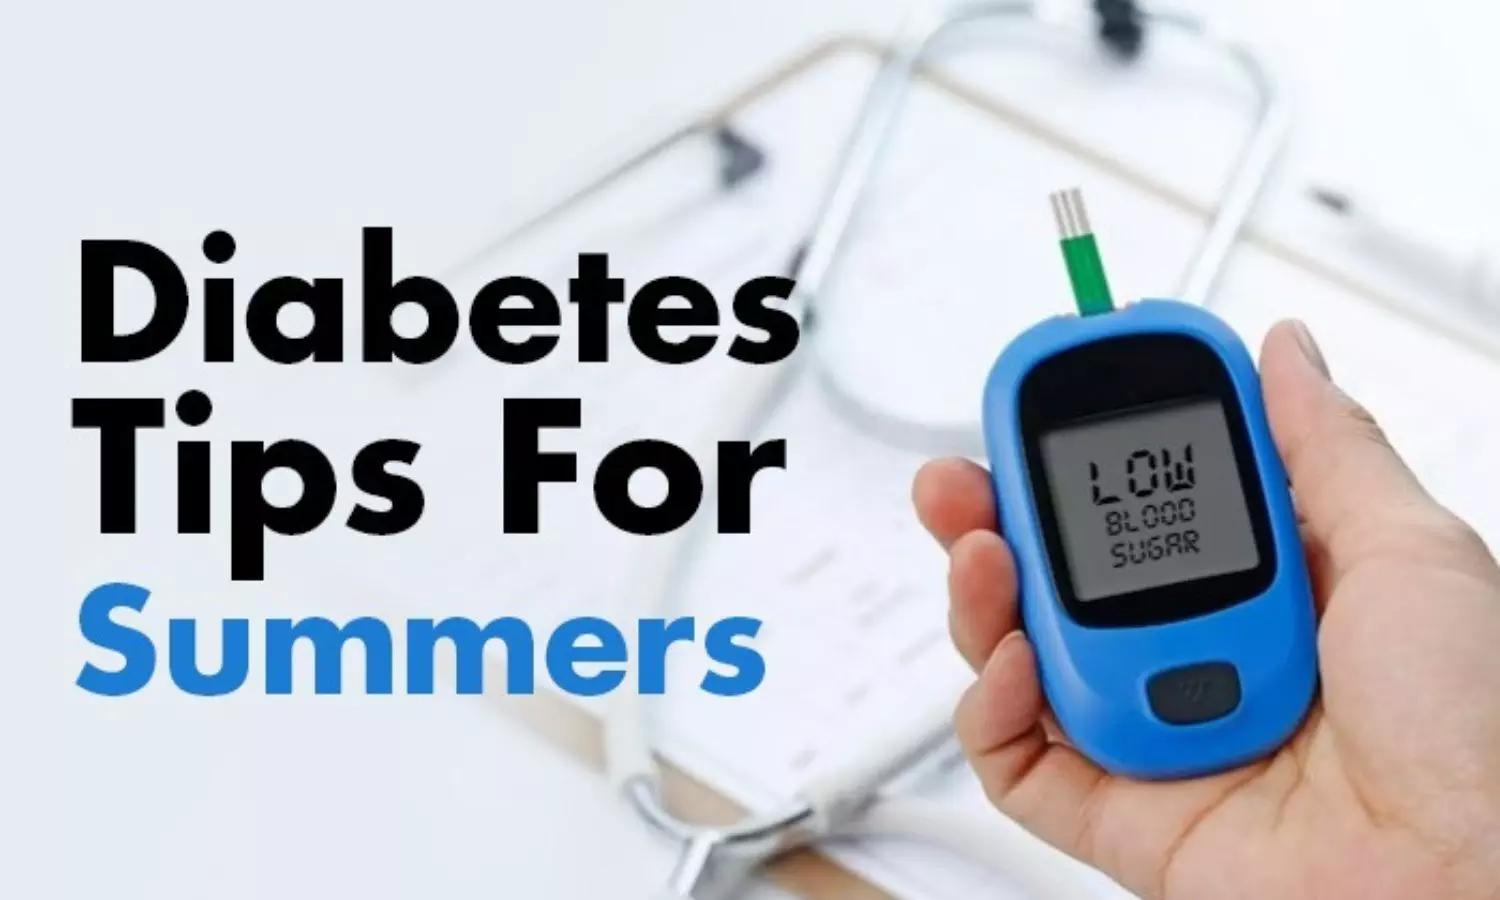 6 Proven Tips for Diabetes Management During Summer